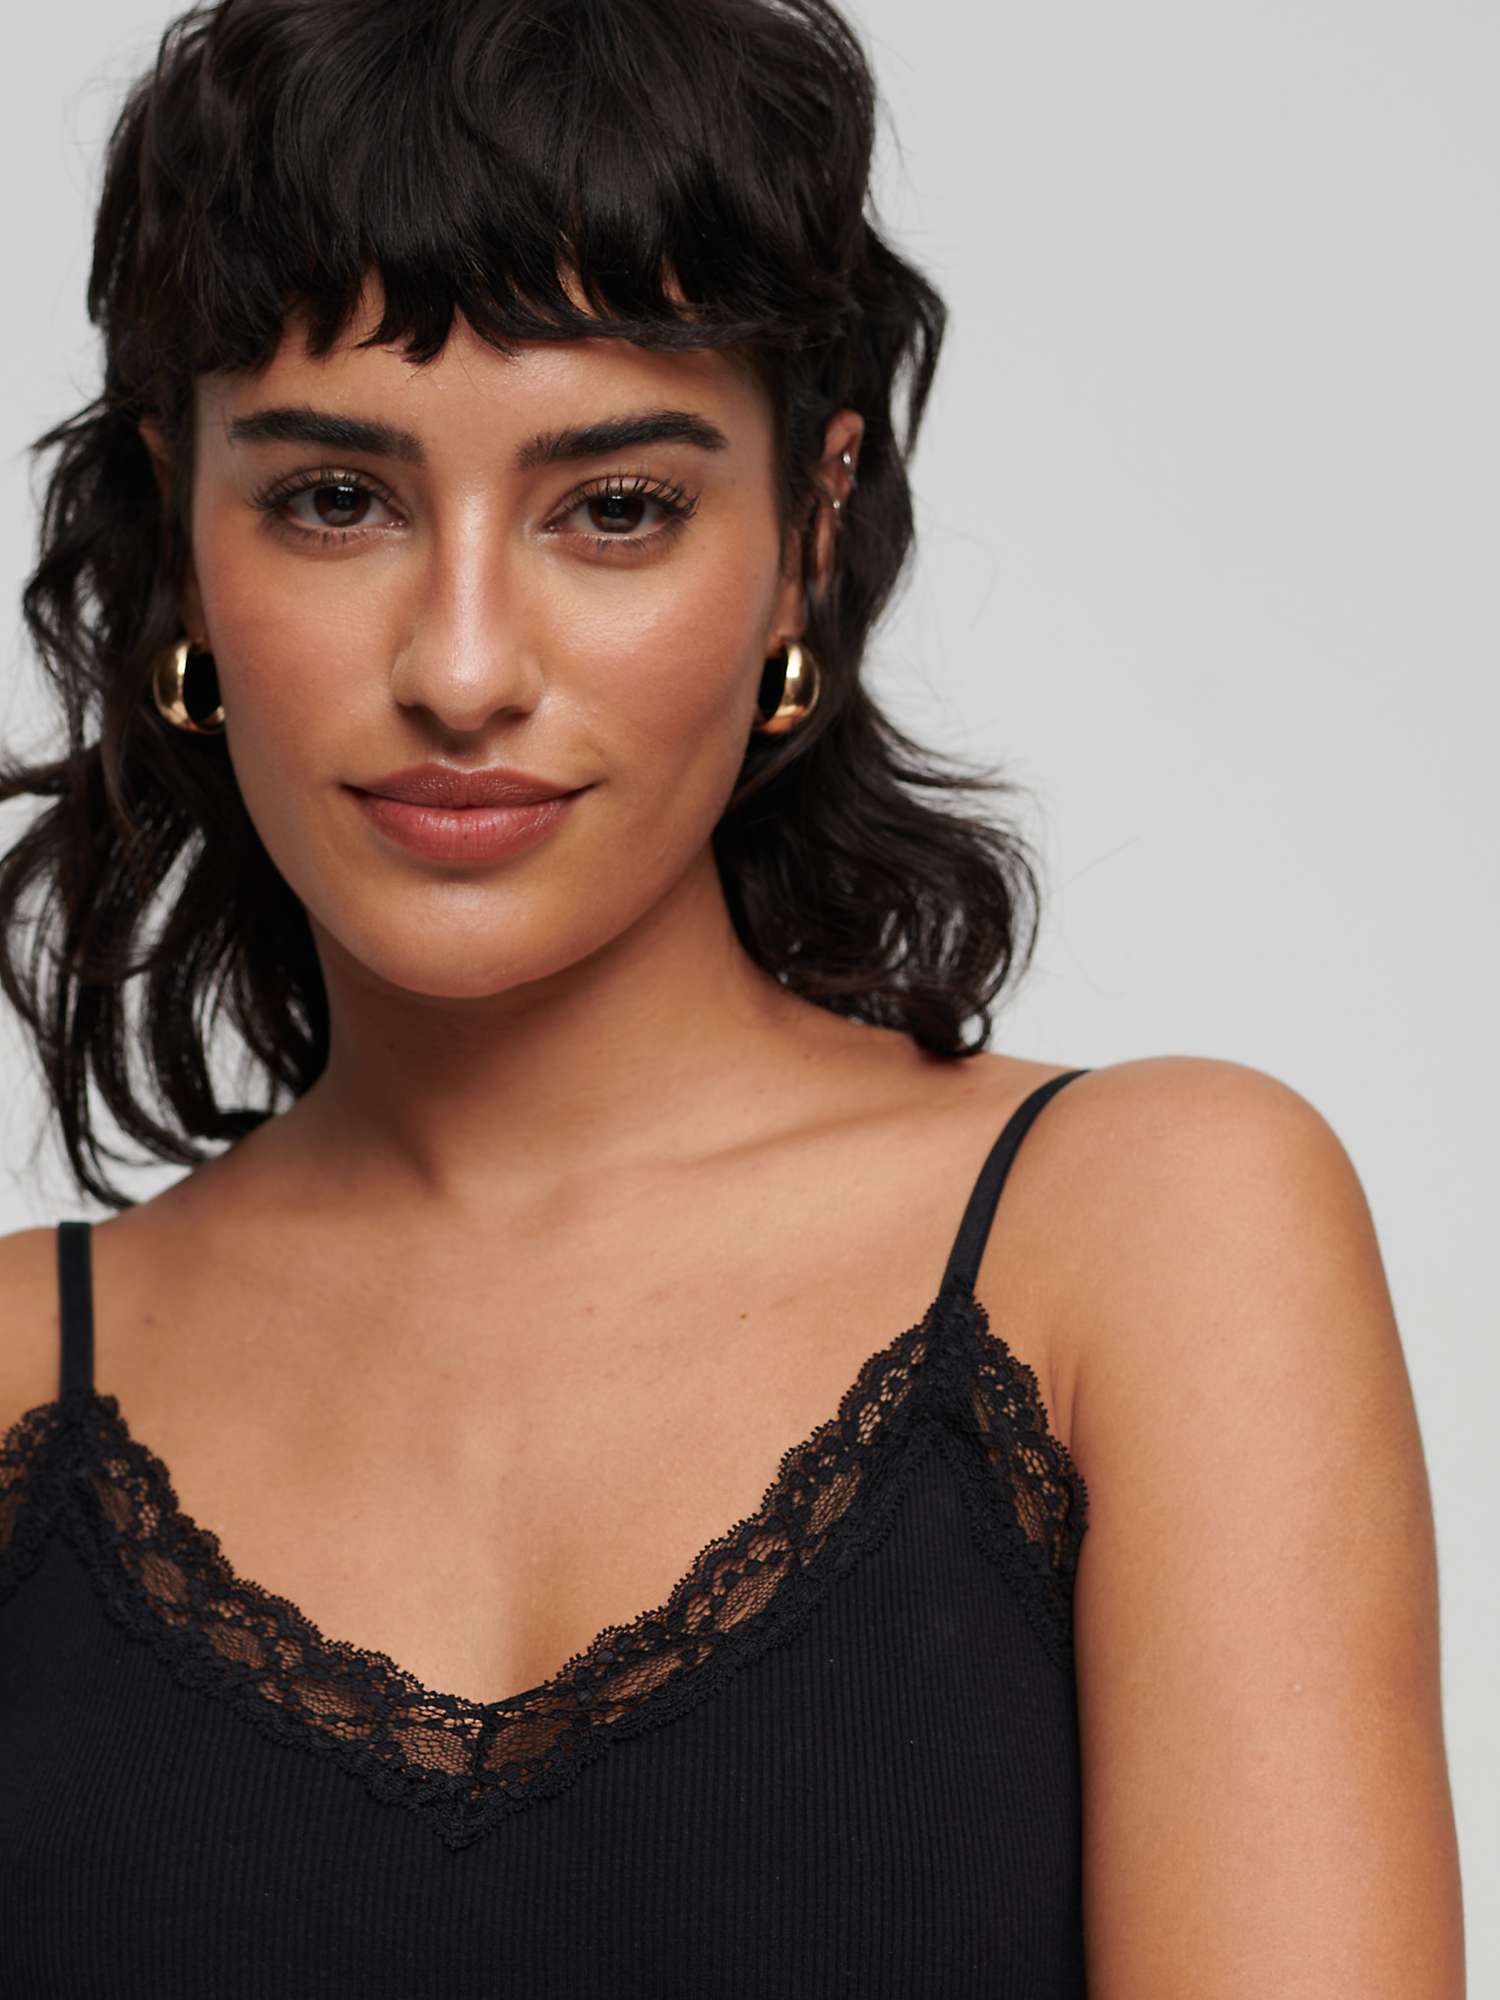 Buy Superdry Organic Cotton Essential Rib Lace Cami Online at johnlewis.com